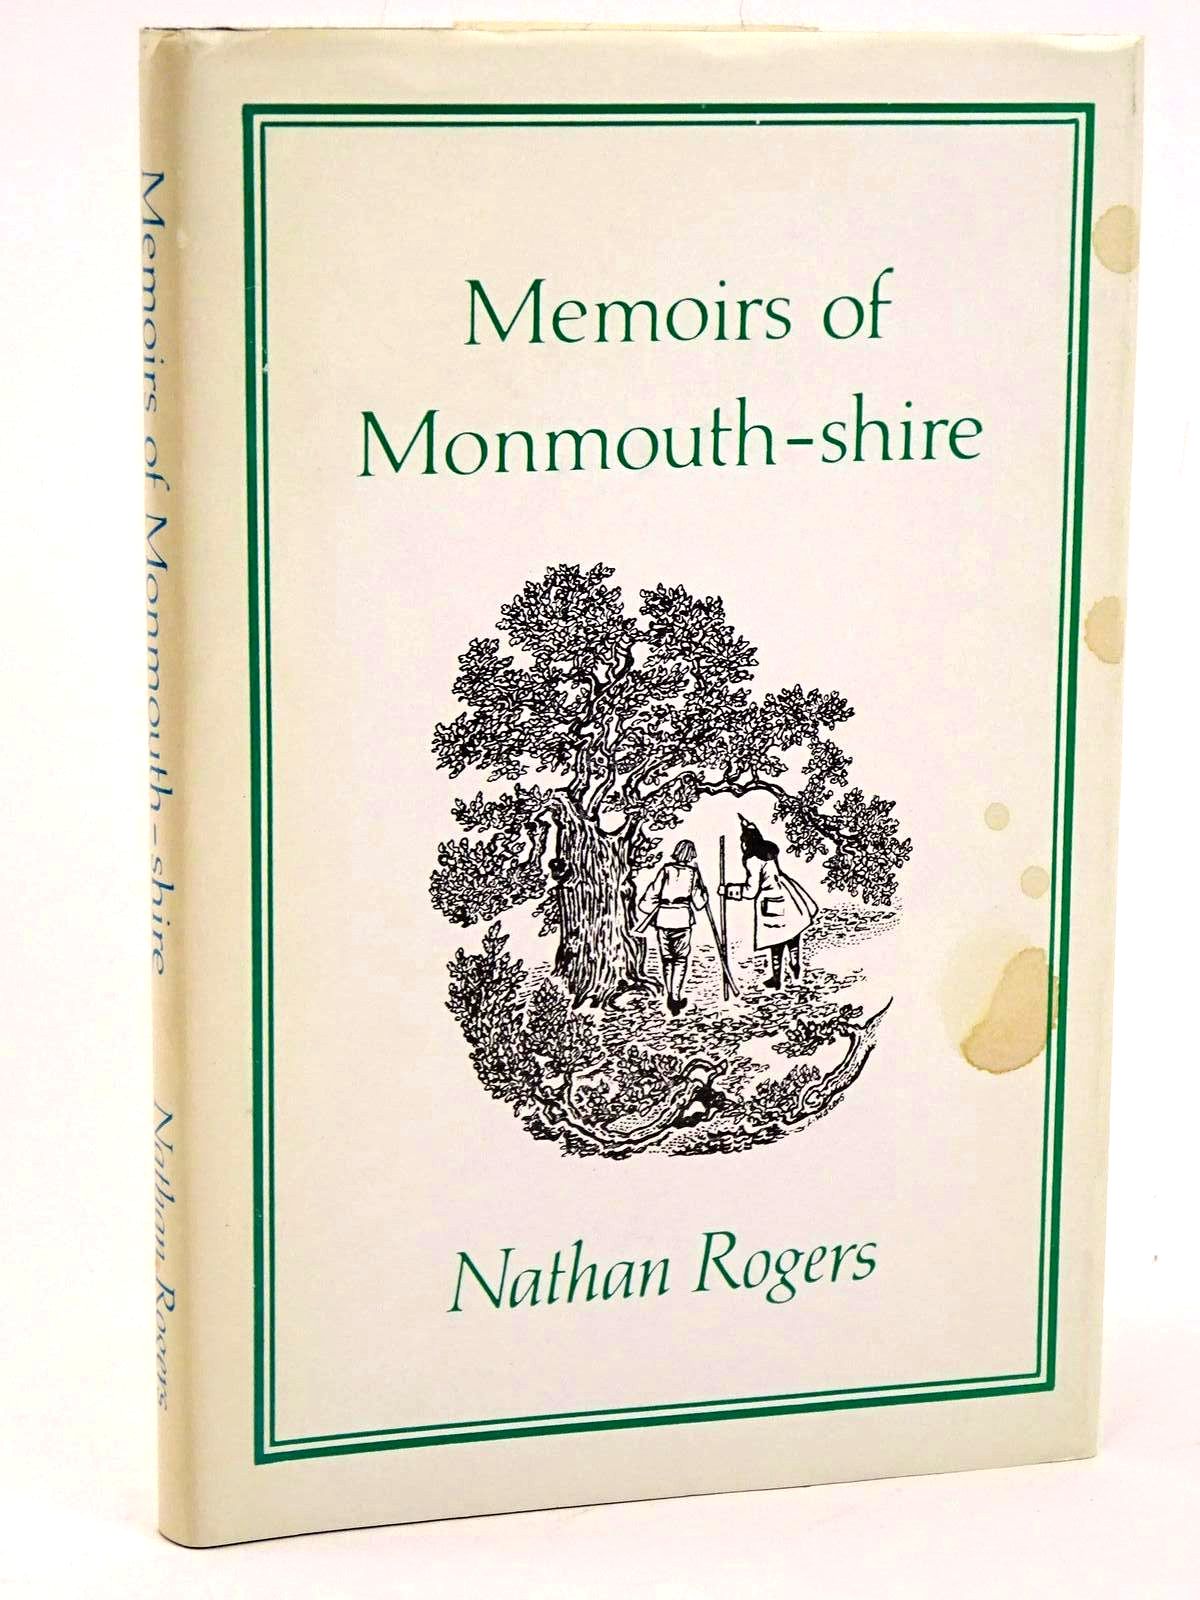 Photo of MEMOIRS OF MONMOUTH-SHIRE 1708 written by Rogers, Nathan illustrated by Waters, Linda published by Moss Rose Press (STOCK CODE: 1318392)  for sale by Stella & Rose's Books